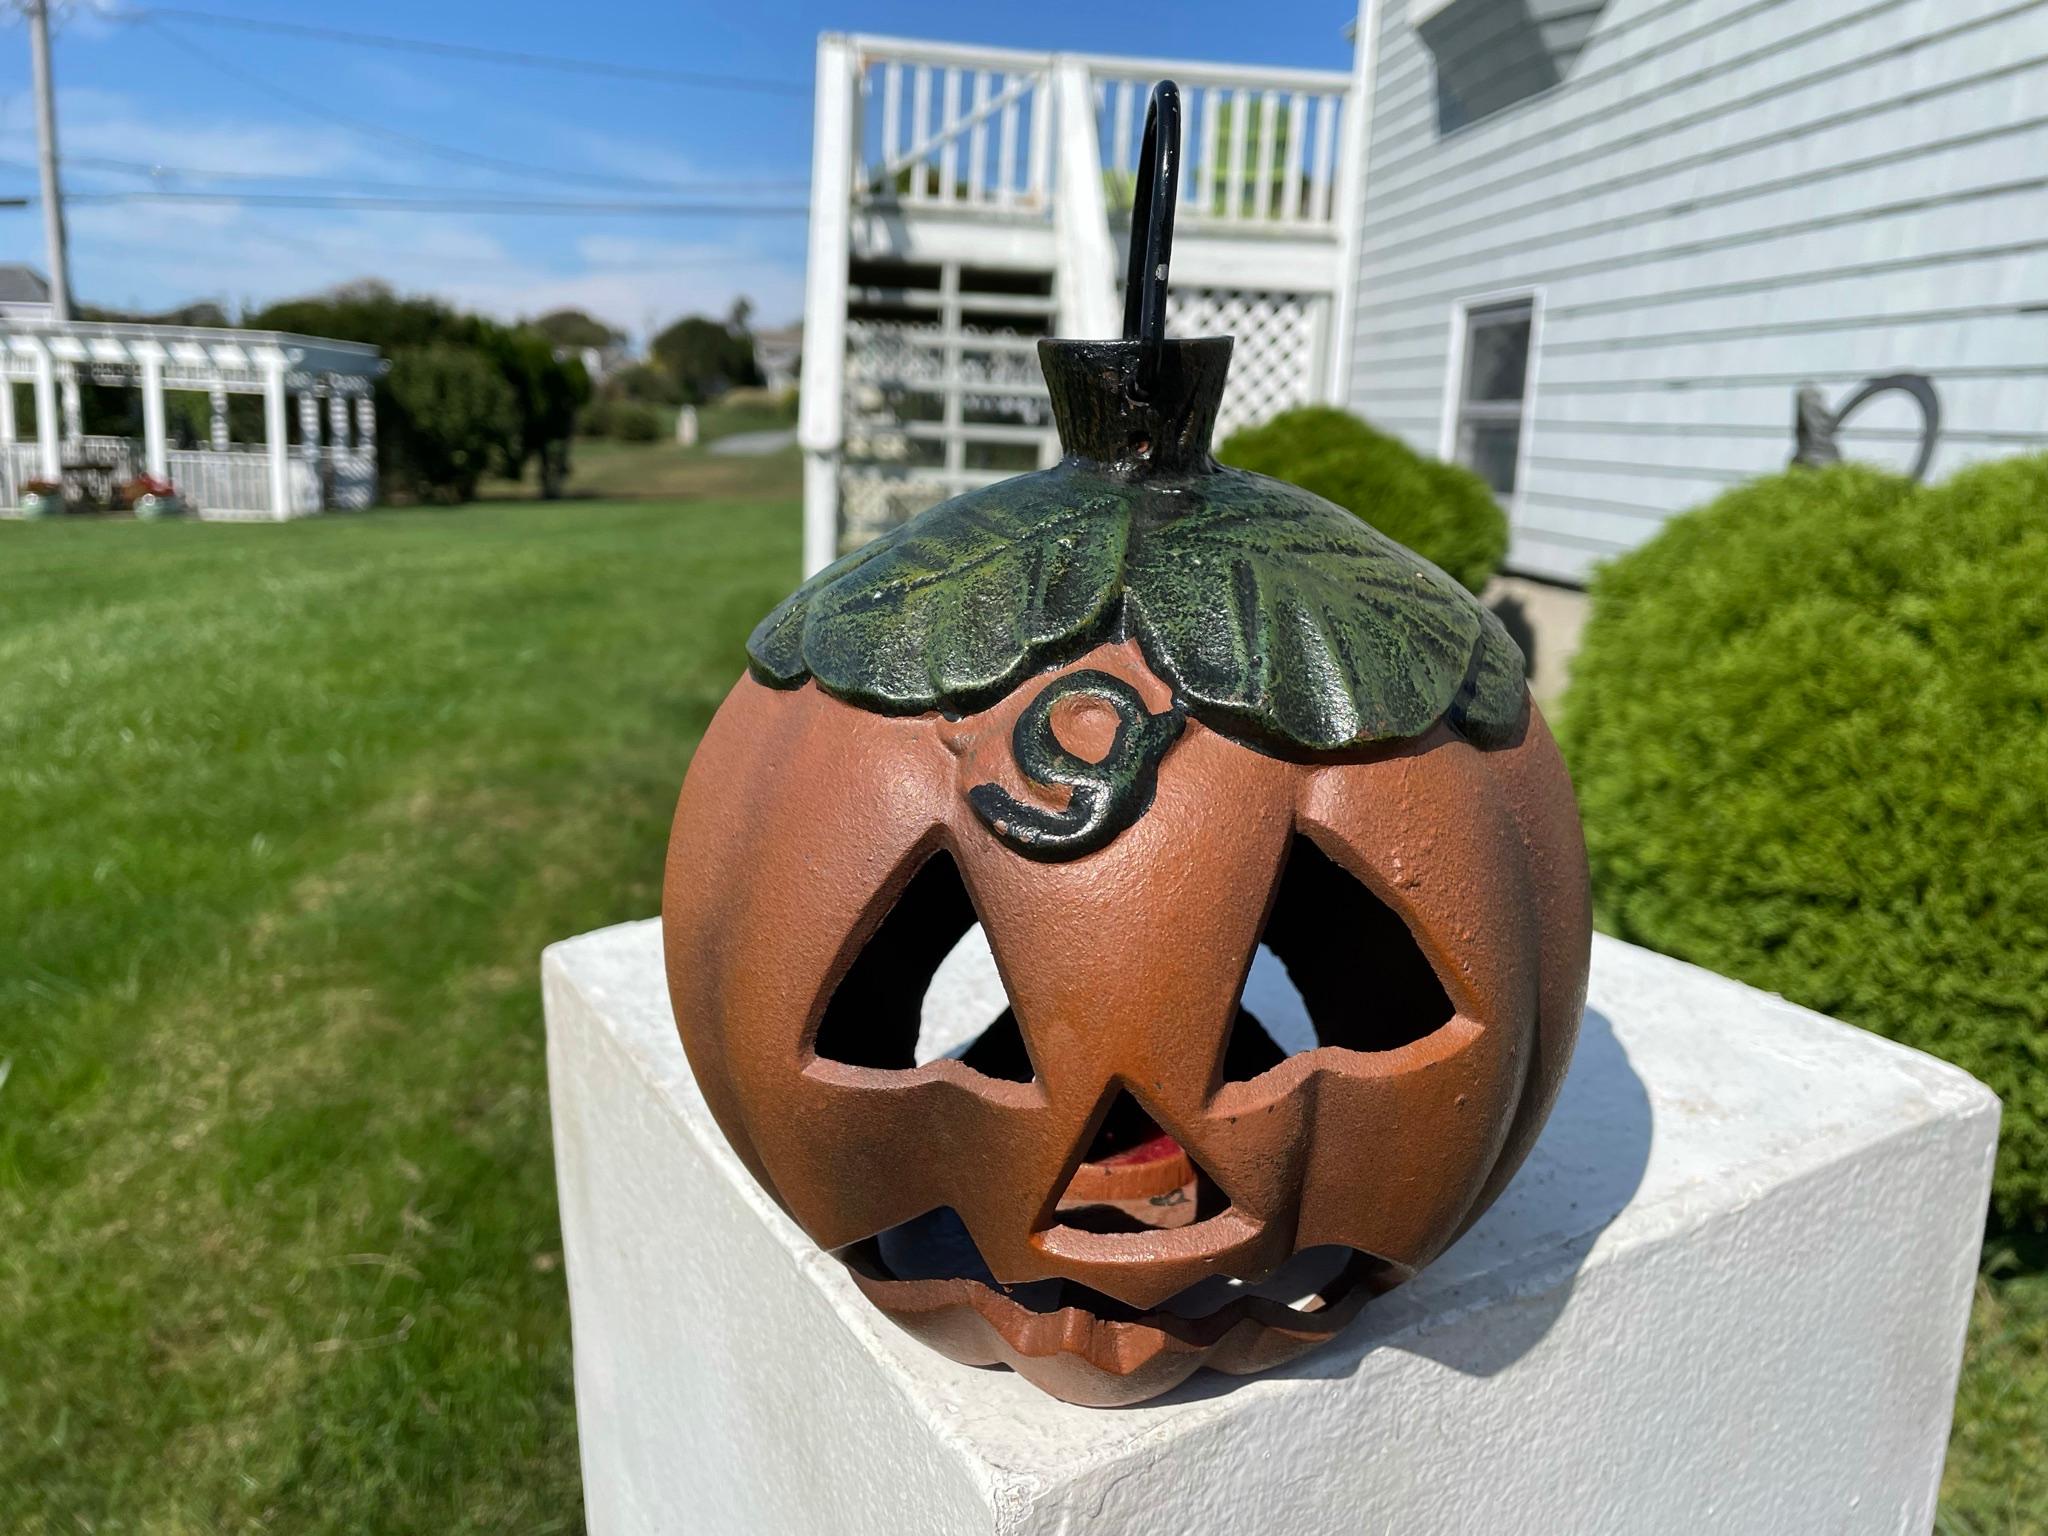 From our recent Acquisitions- a happy two faced cast Jack-O-Lantern , #3

This handsome quality antique iron halloween Jack-O-Lantern with its two charming faces still retains most of its original black, green, and orange paint- just the way we